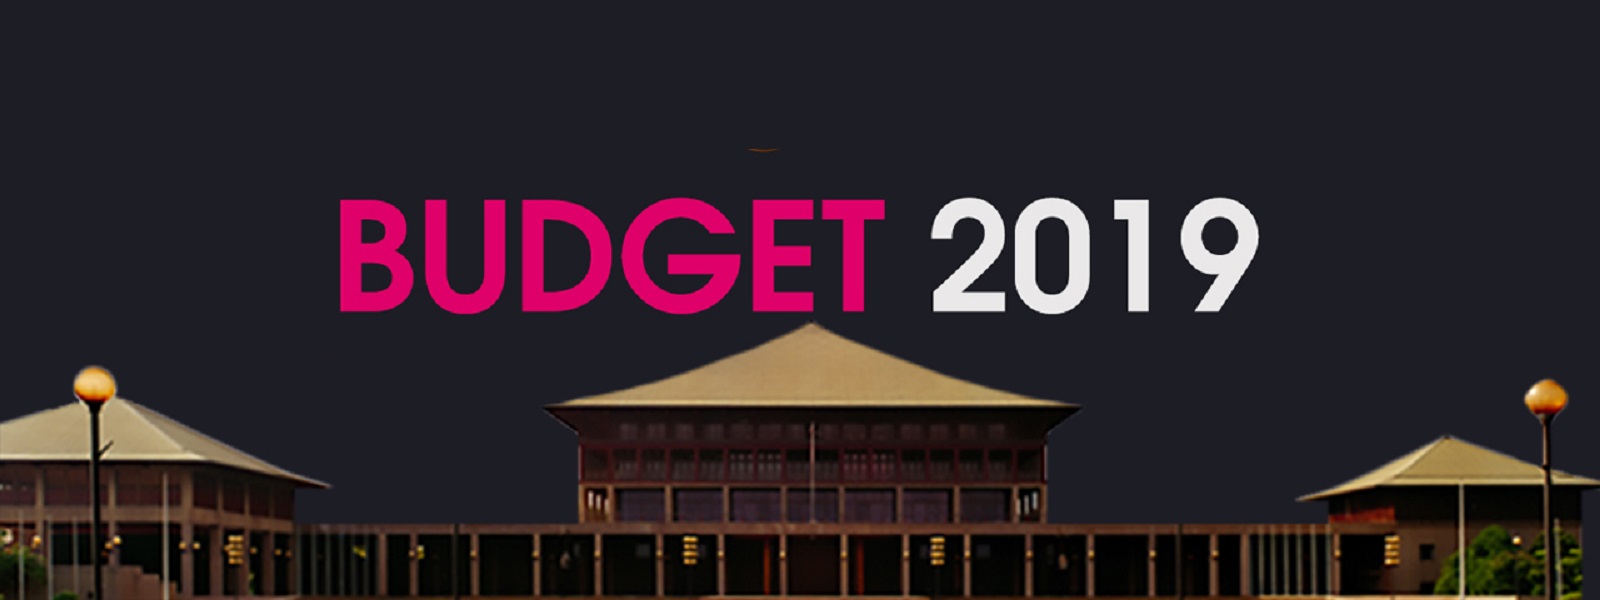 Budget-2019: Committee Stage Debate today